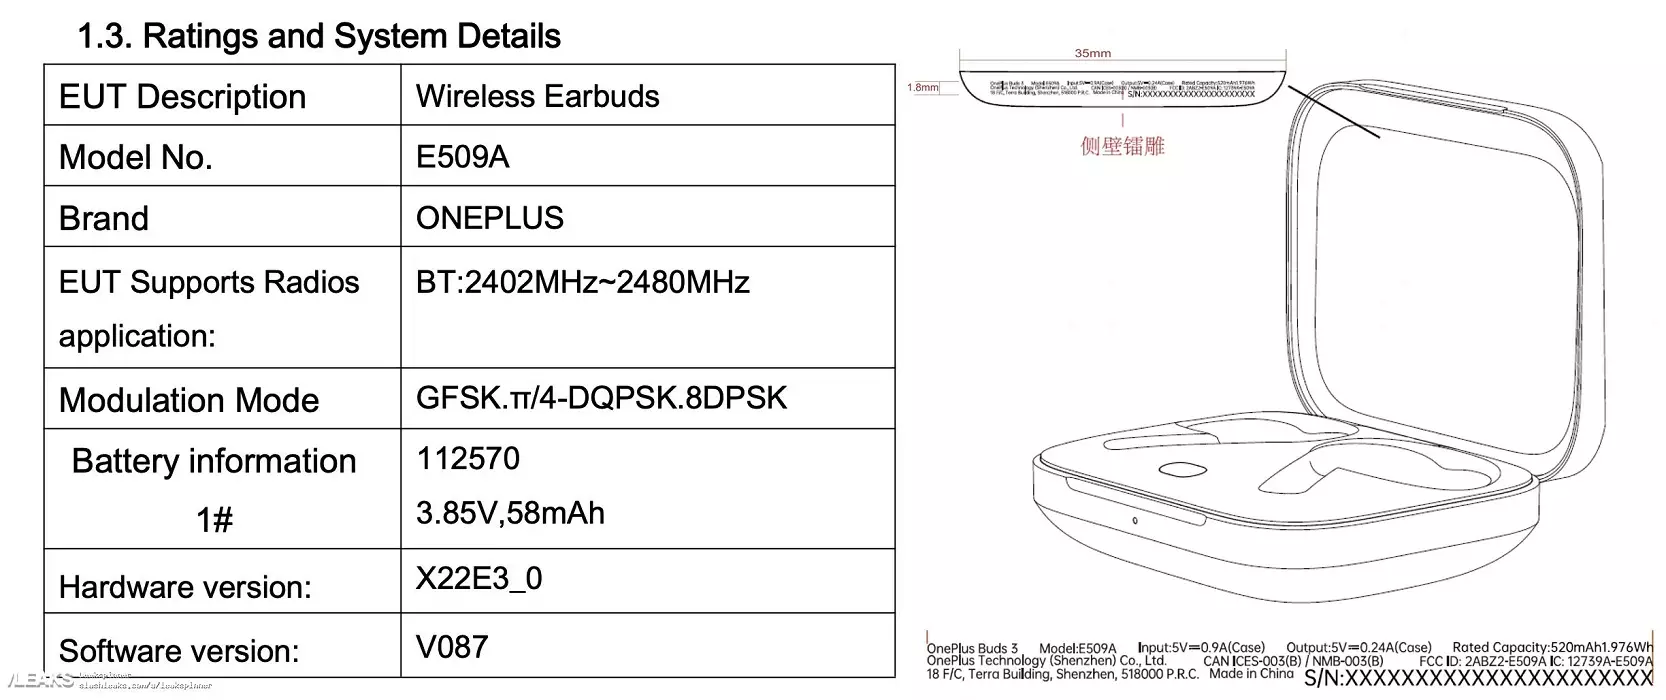 oneplus buds 3 schematics and battery capacity fcc.